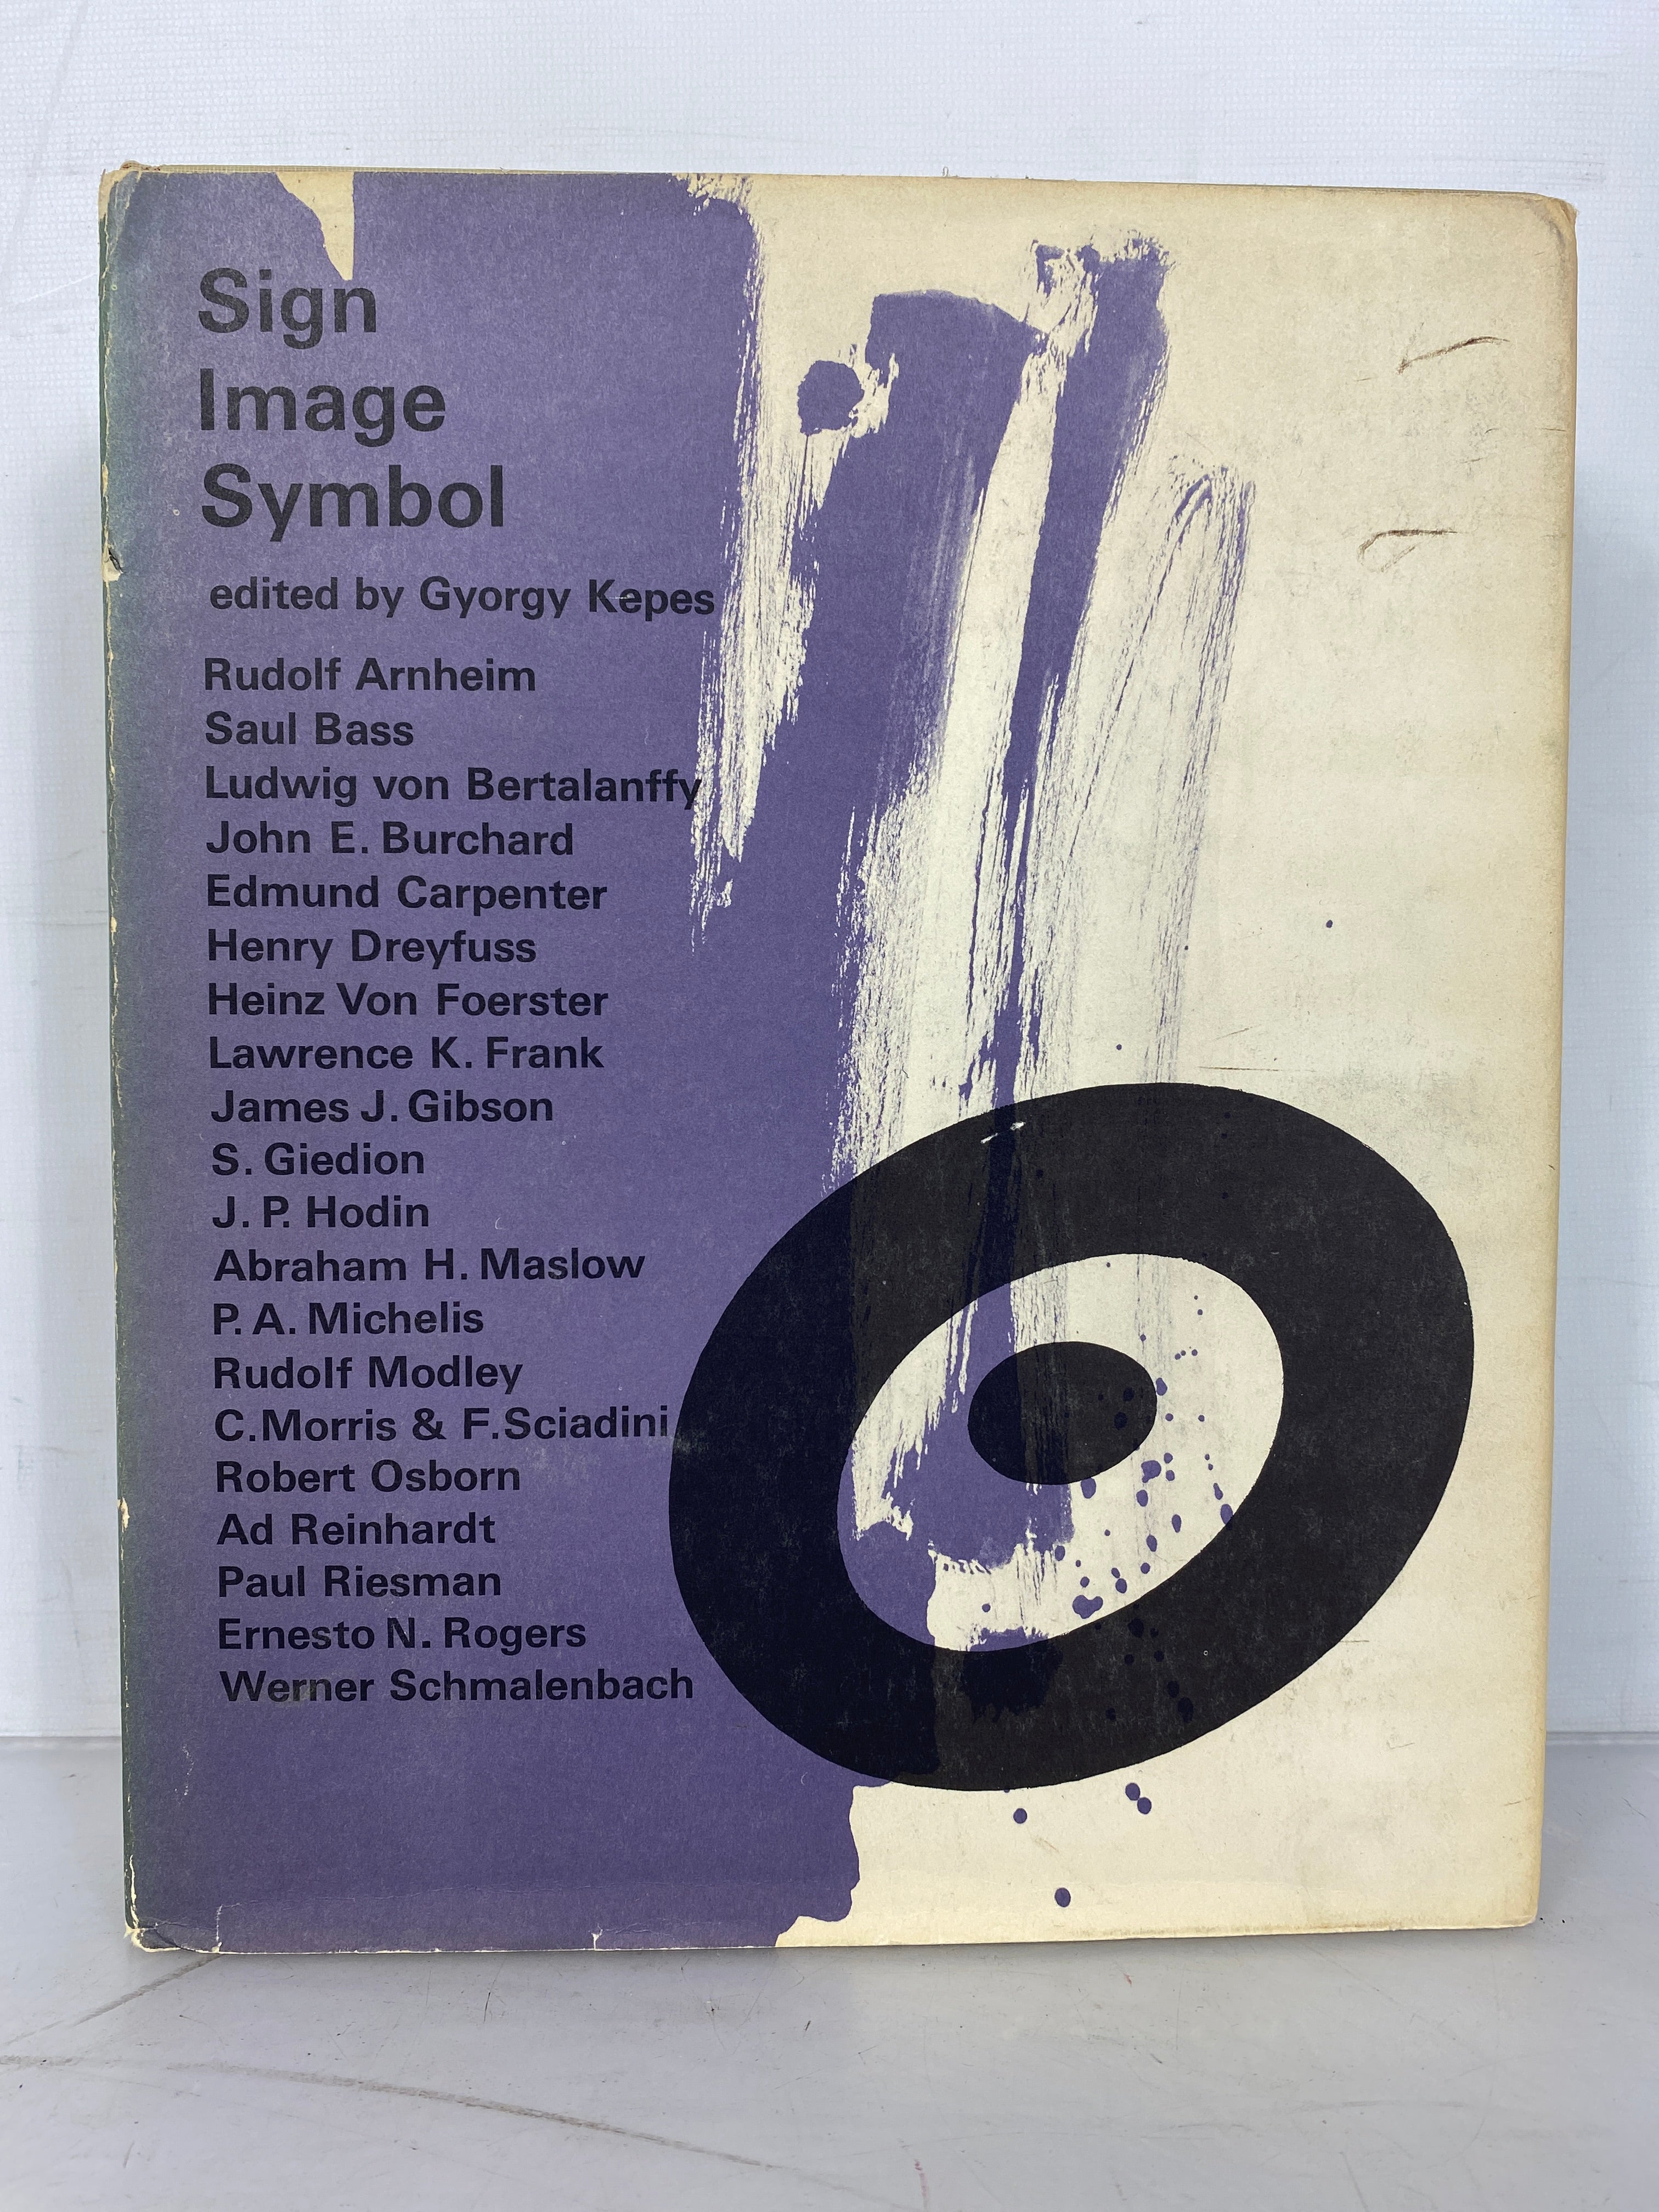 Sign Image Symbol by Gyorgy Kepes First Printing 1966 George Braziller HC DJ